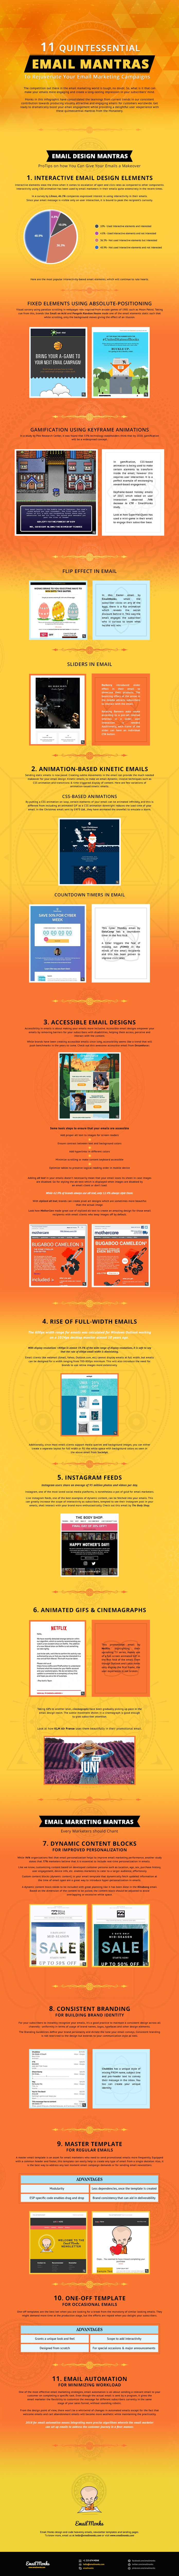 Email Design and Marketing Mantras 2018